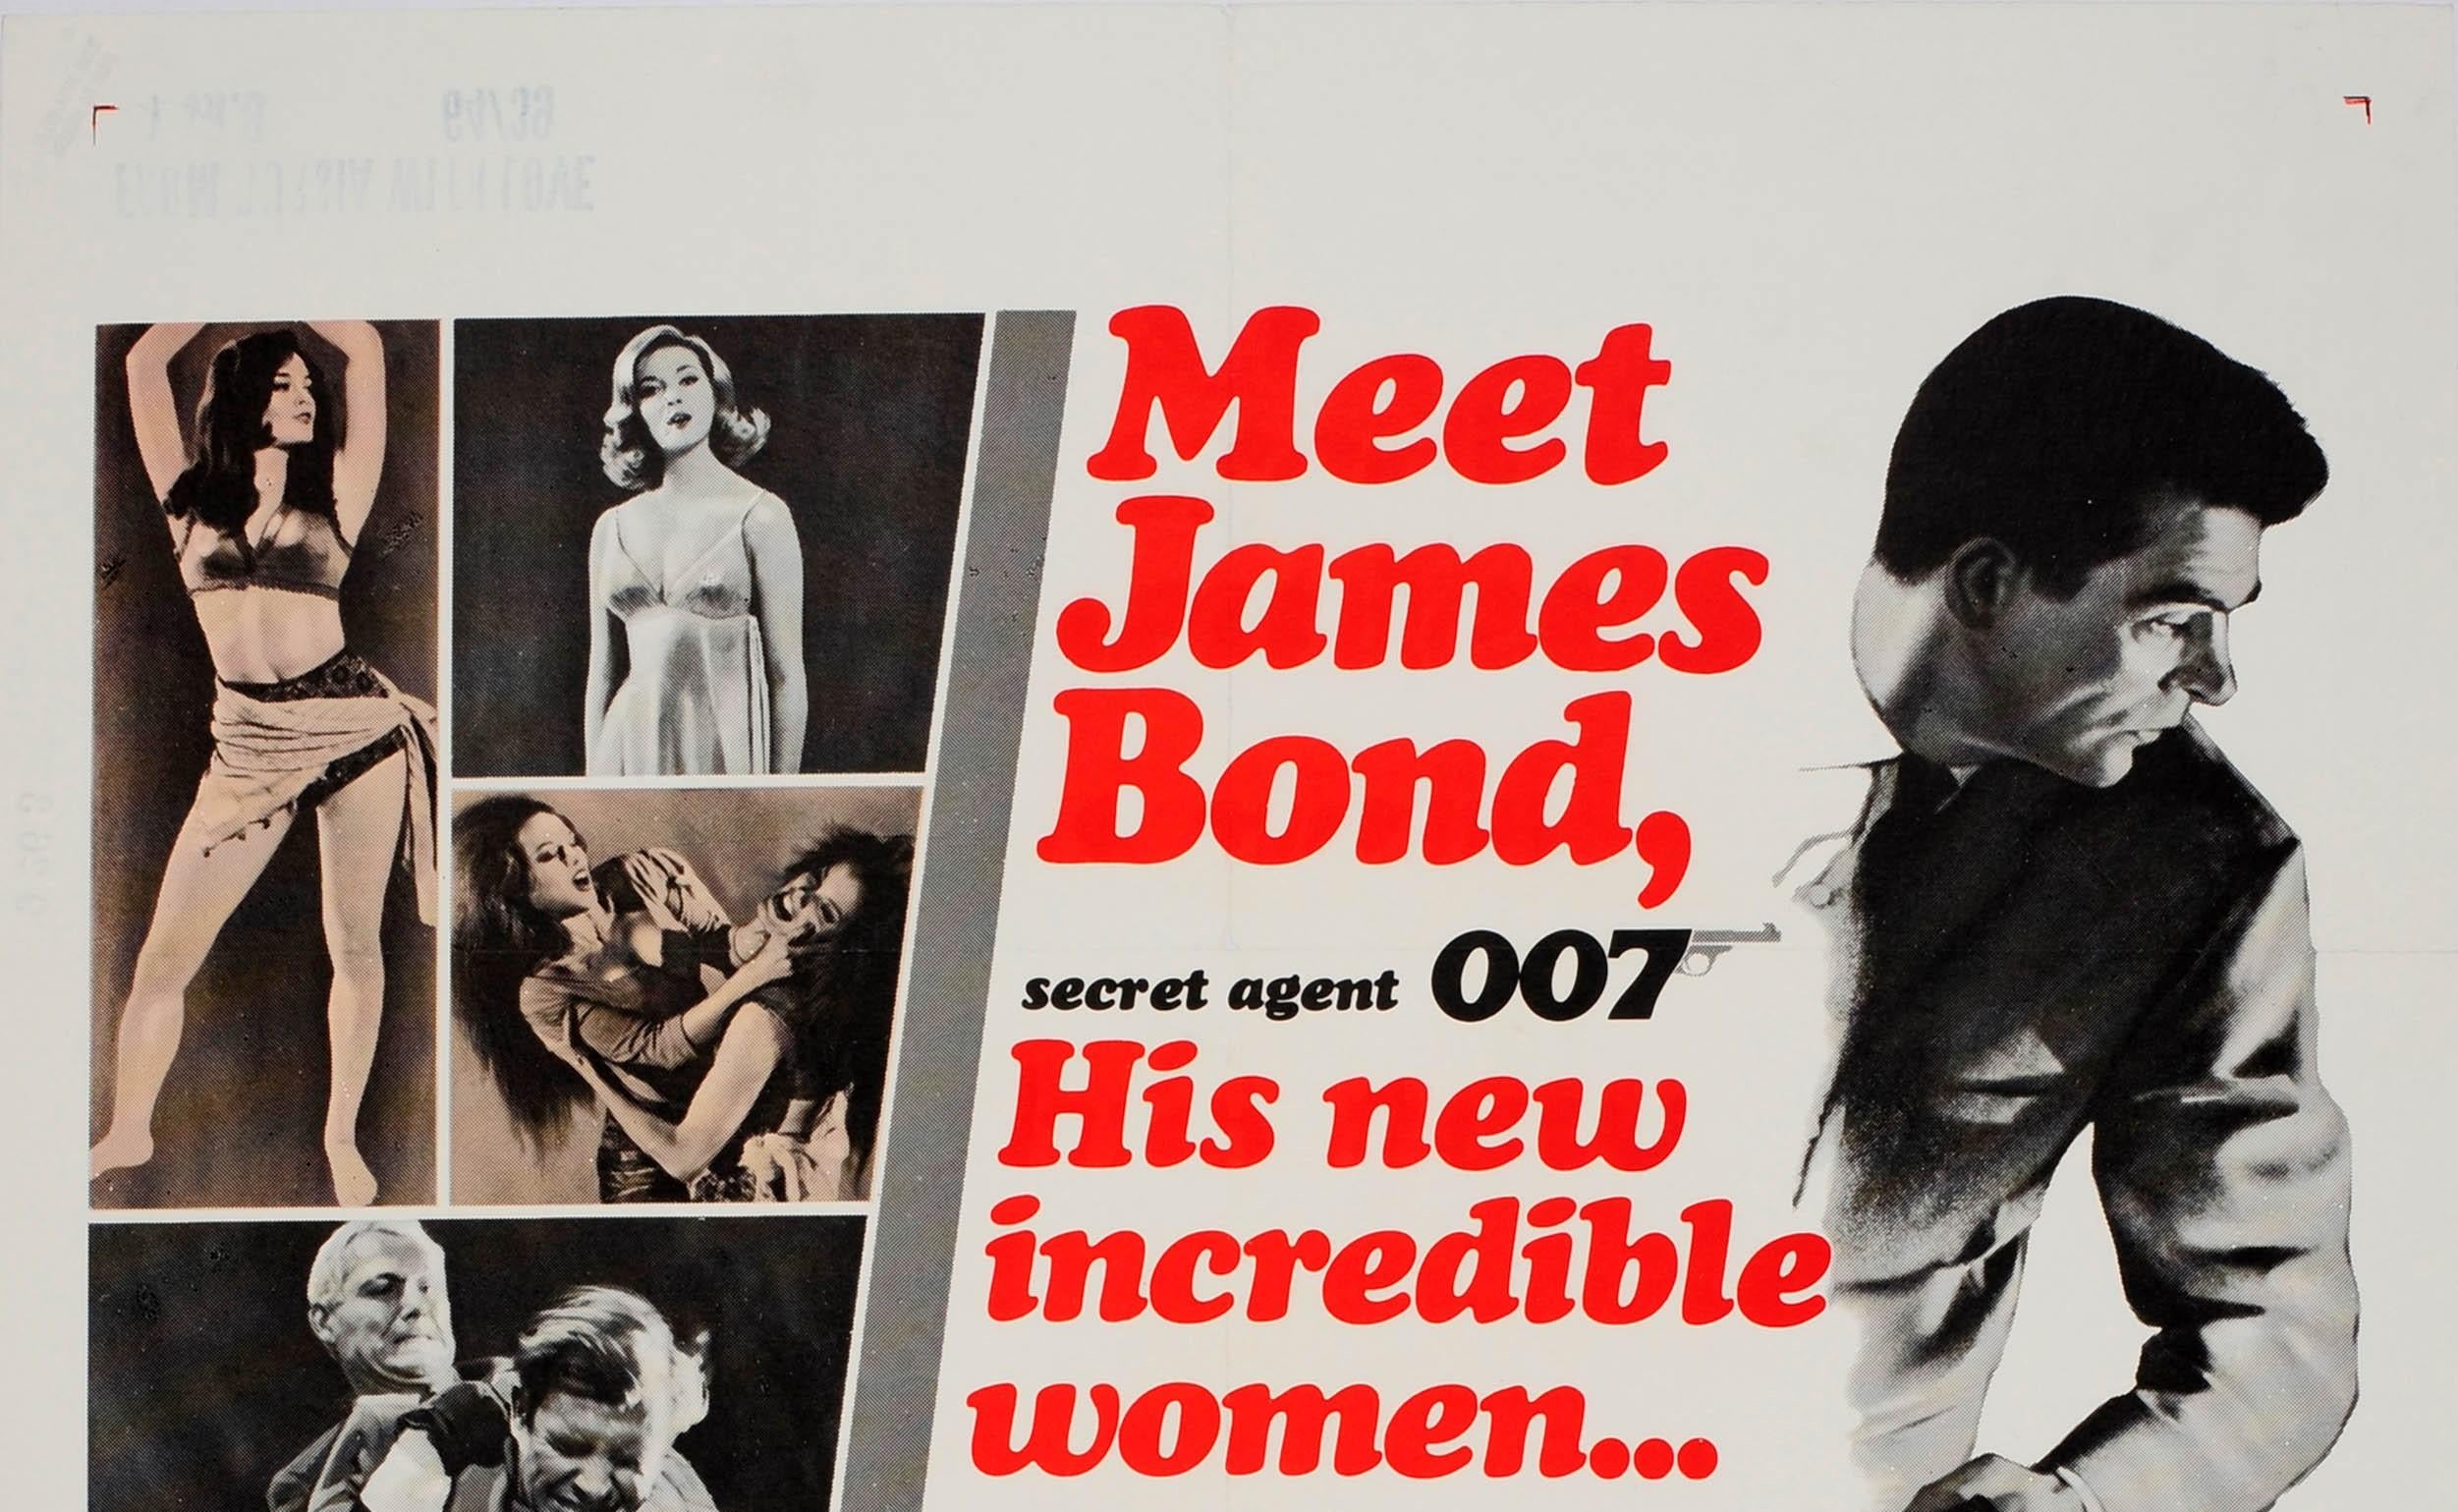 Original vintage movie poster for the US release of 007 James Bond film From Russia with Love directed by Terence Young and starring Sean Connery, Robert Shaw, Pedro Armendariz, Lotte Lenya and Bernard Lee. Great artwork showing Sean Connery as